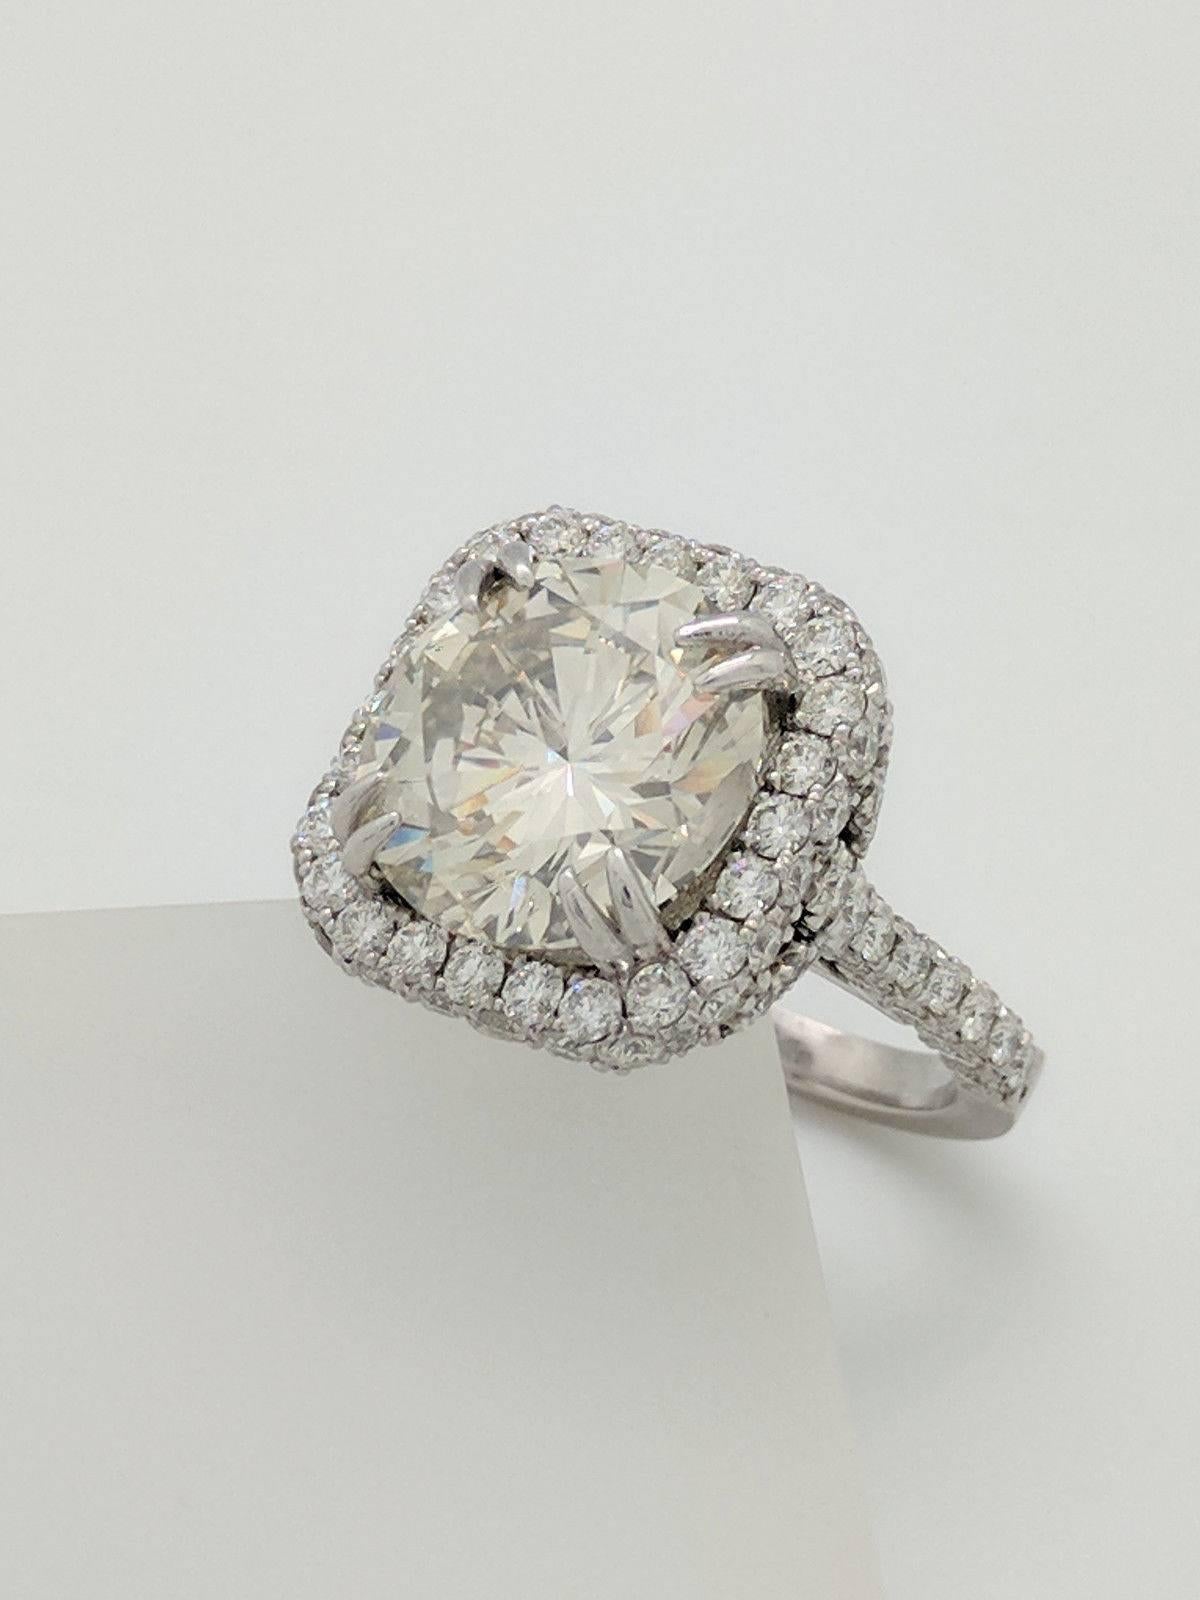 10.02ct Natural Round Diamond in Custom Platinum Engagement Ring Setting 3.60cts.
GIA Certified: I1 Clarity ~ L Color
 
You are viewing a beautiful 10.02ct natural round diamond. This diamond has been certified by GIA and graded as I1 in clarity and